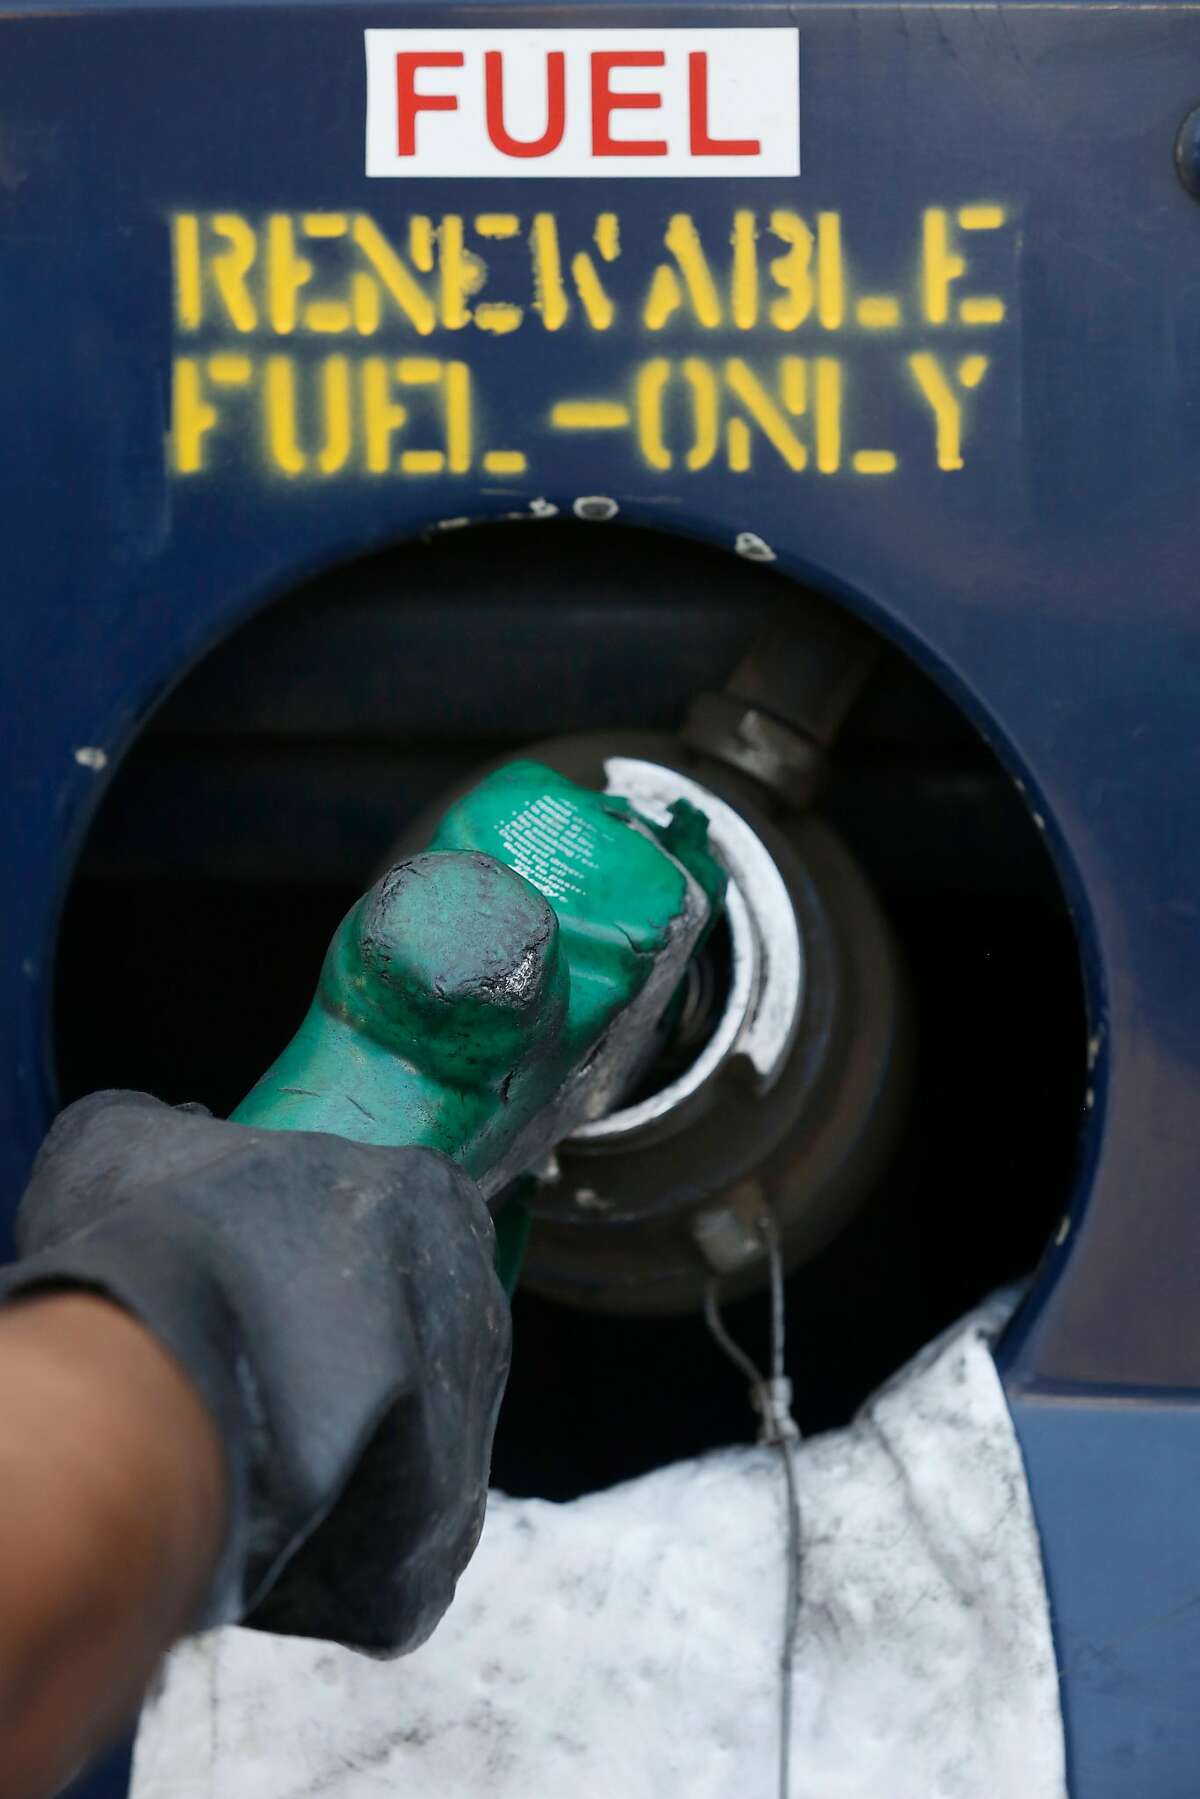 Oscar Muro, Golden Gate Petroleum trainer, fills a Capital Corridor locomotive with rewnewable diesel at the Amtrak Maintenance Facility on Tuesday, September 12, 2017 in Oakland, Calif.